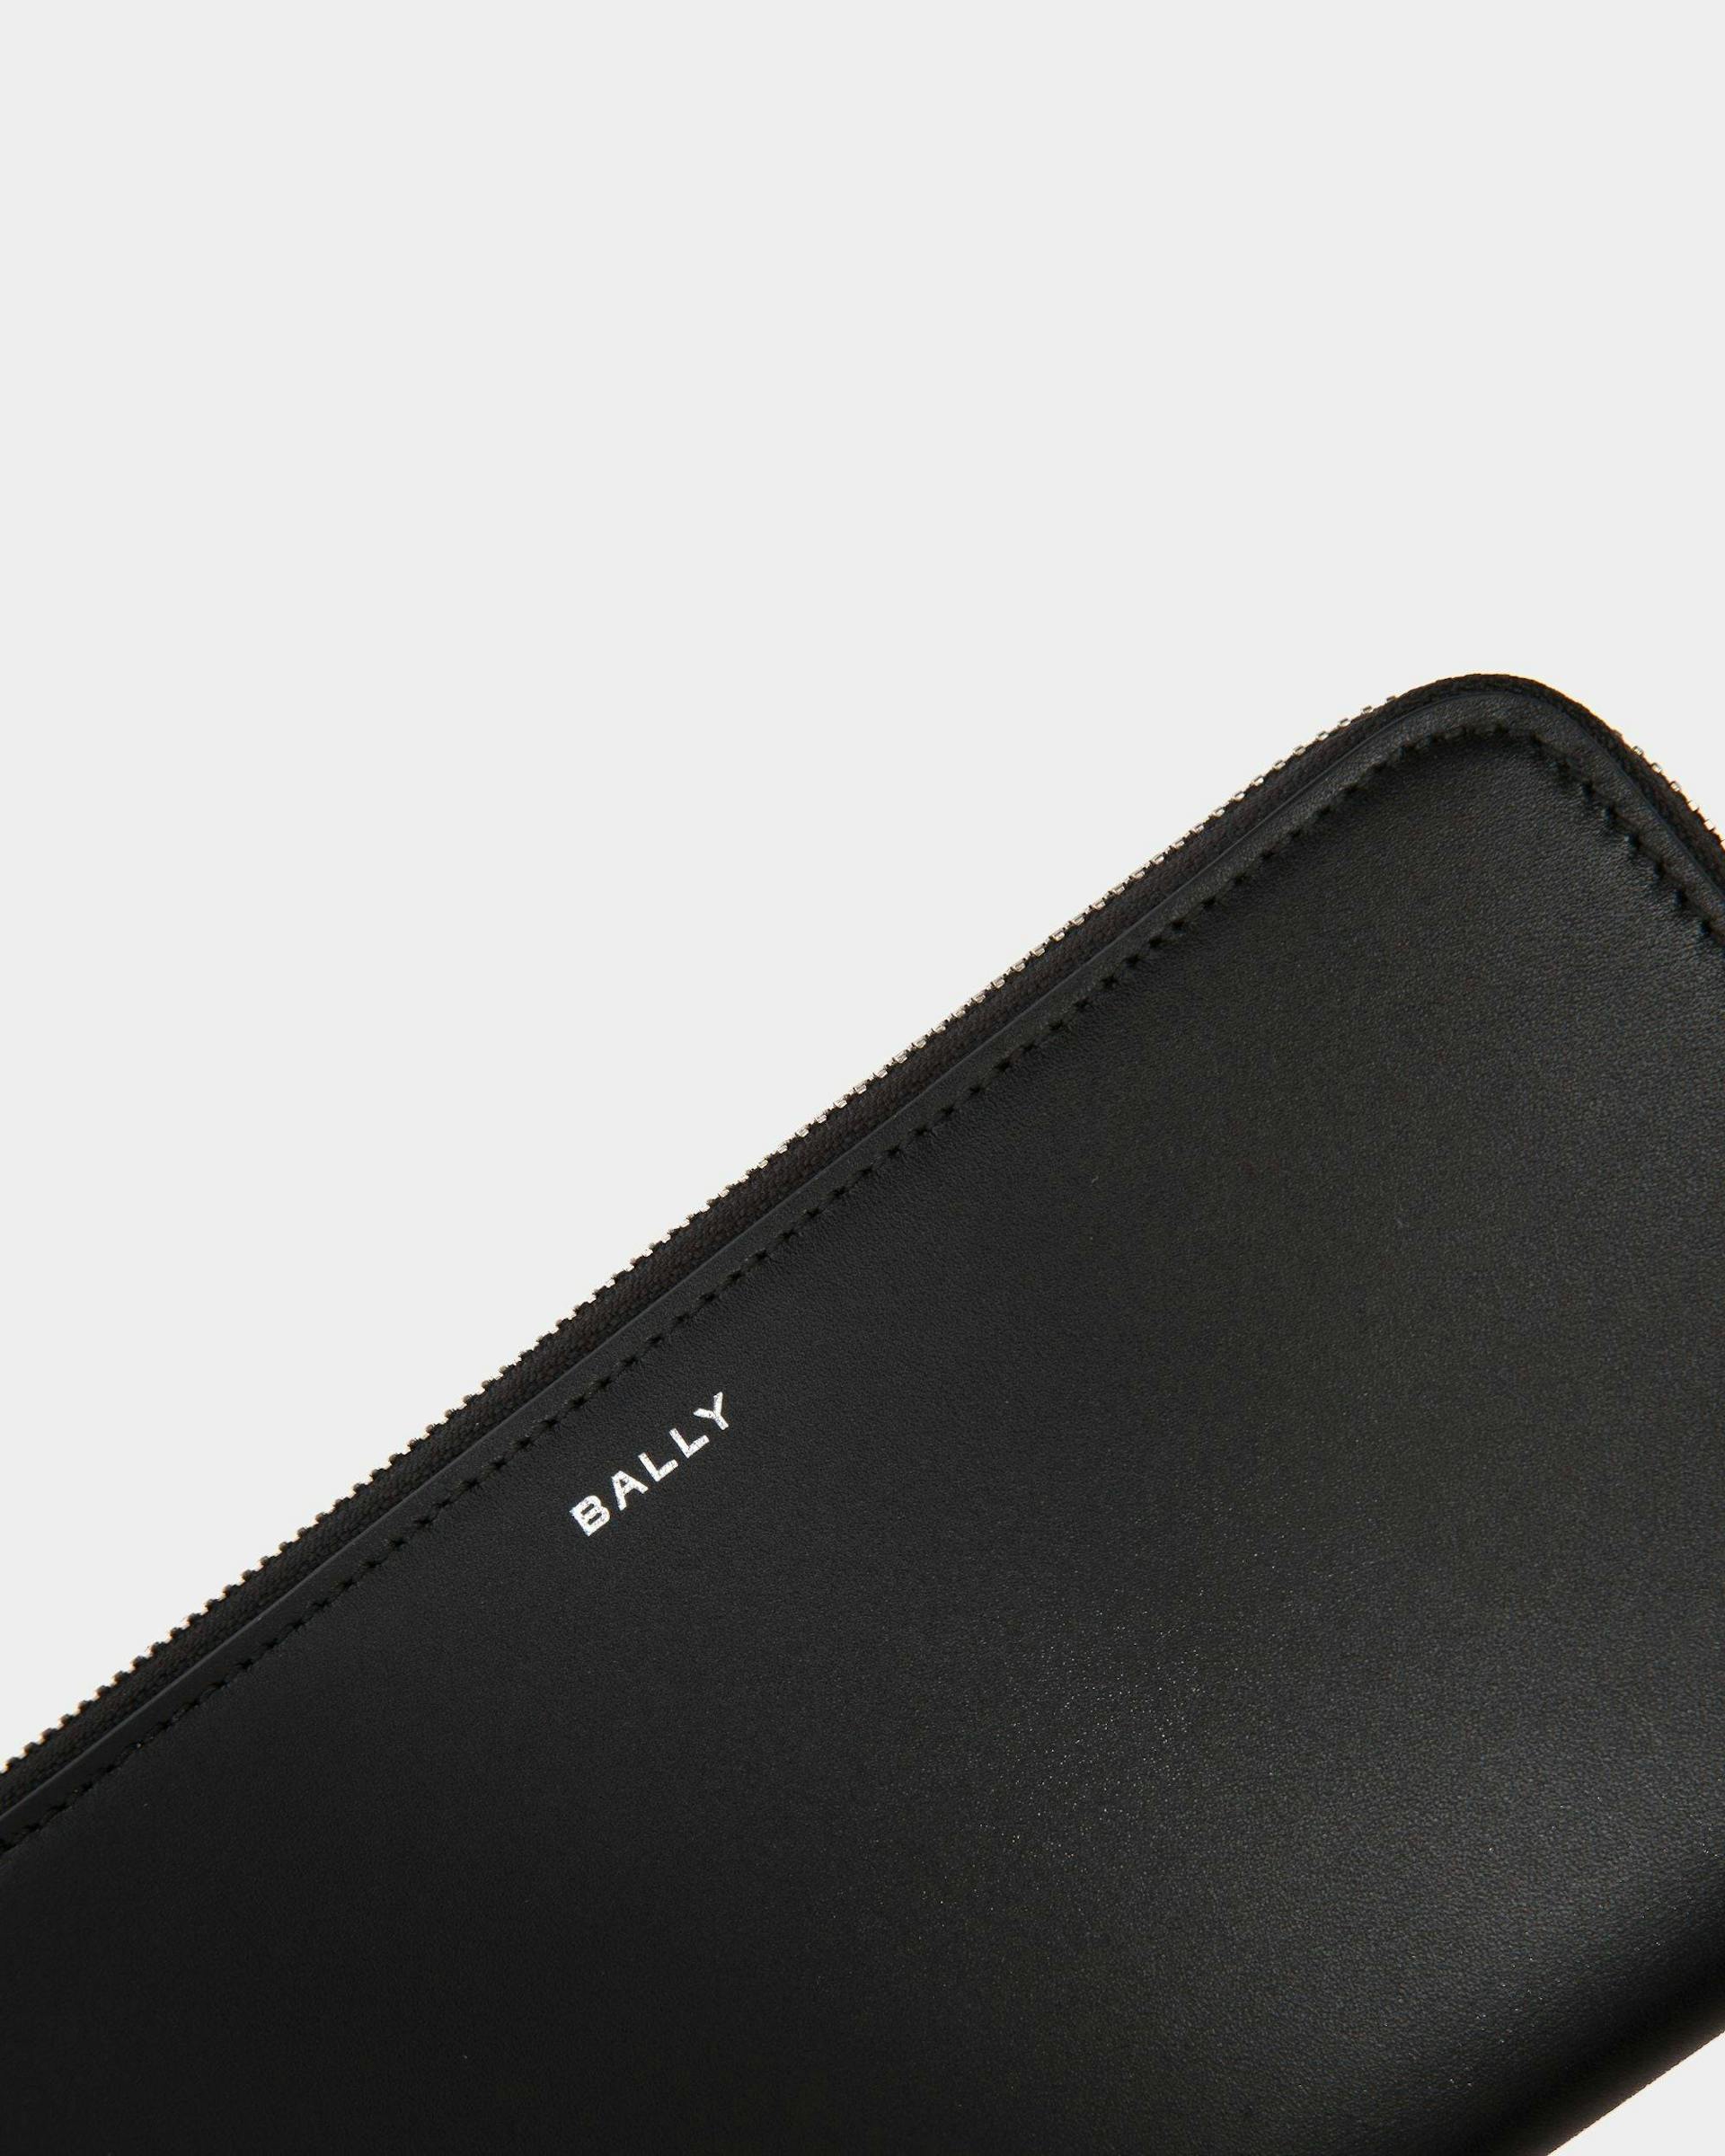 Men's Busy Bally Zip Around Wallet in Black Leather | Bally | Still Life Detail